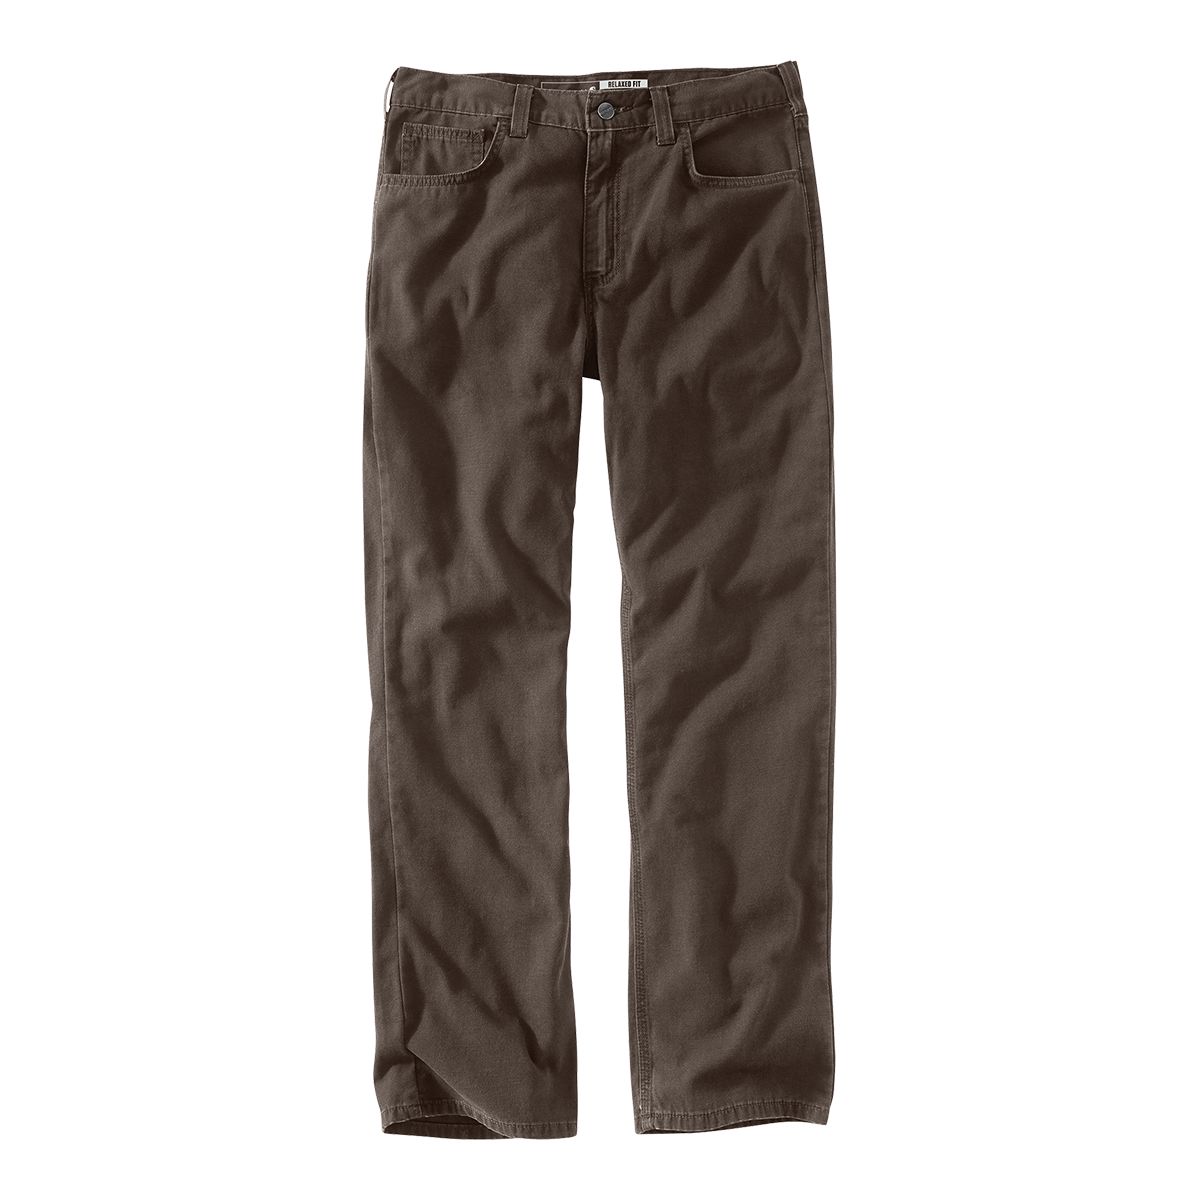 Image of Carhartt Men's Relaxed Fit Canvas 5 Pocket Pants